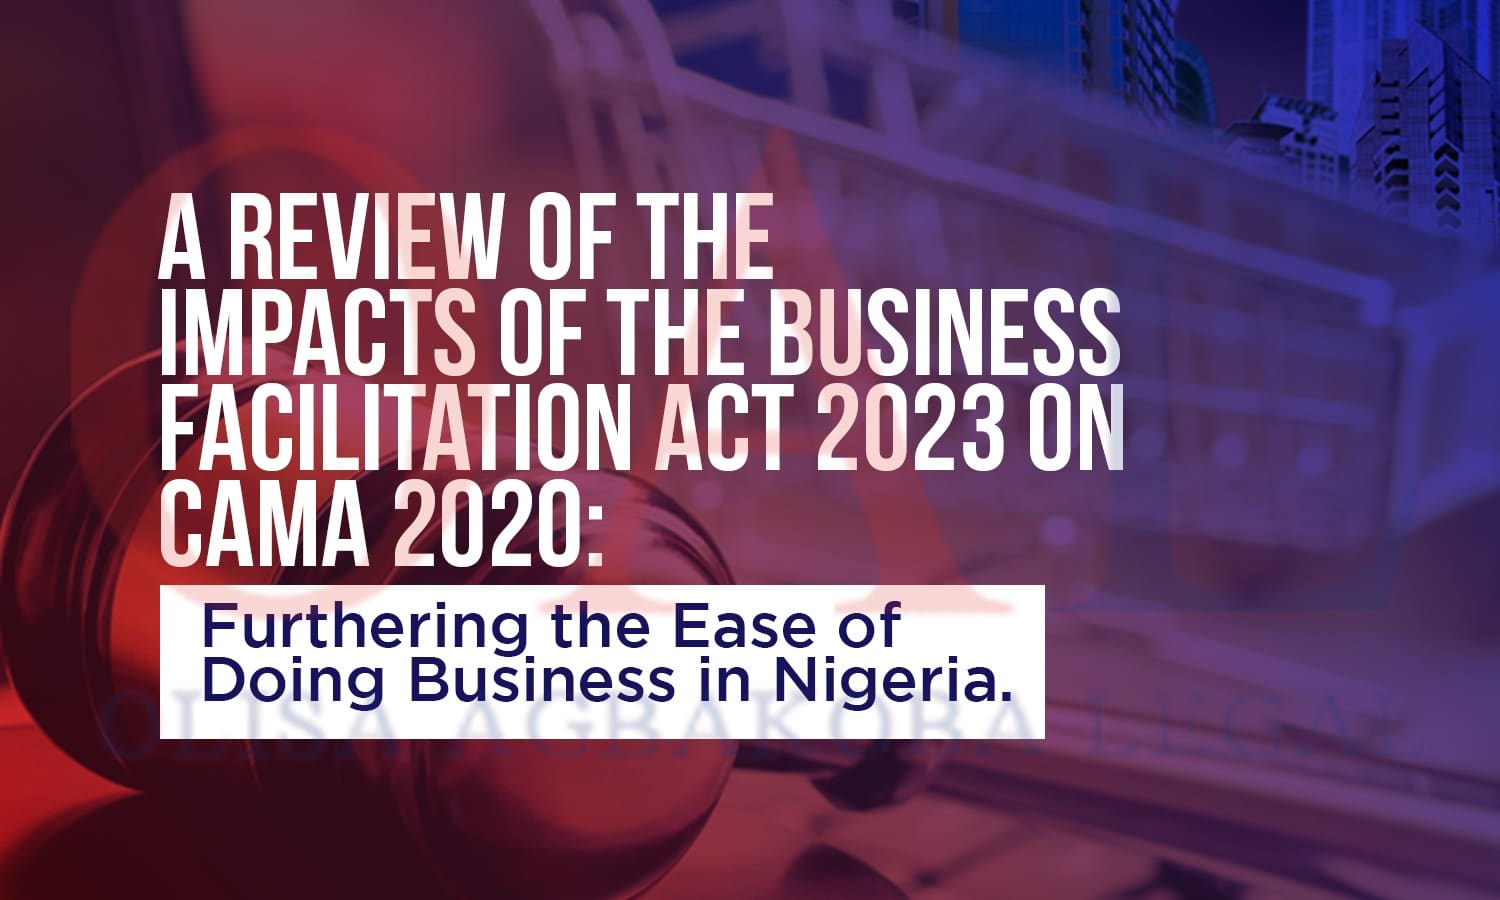 A Review of the Impacts of the Business Facilitation Act 2023 on CAMA 2020. Furthering the Ease of Doing Business in Nigeria by Olisa Agbakoba Legal (OAL).